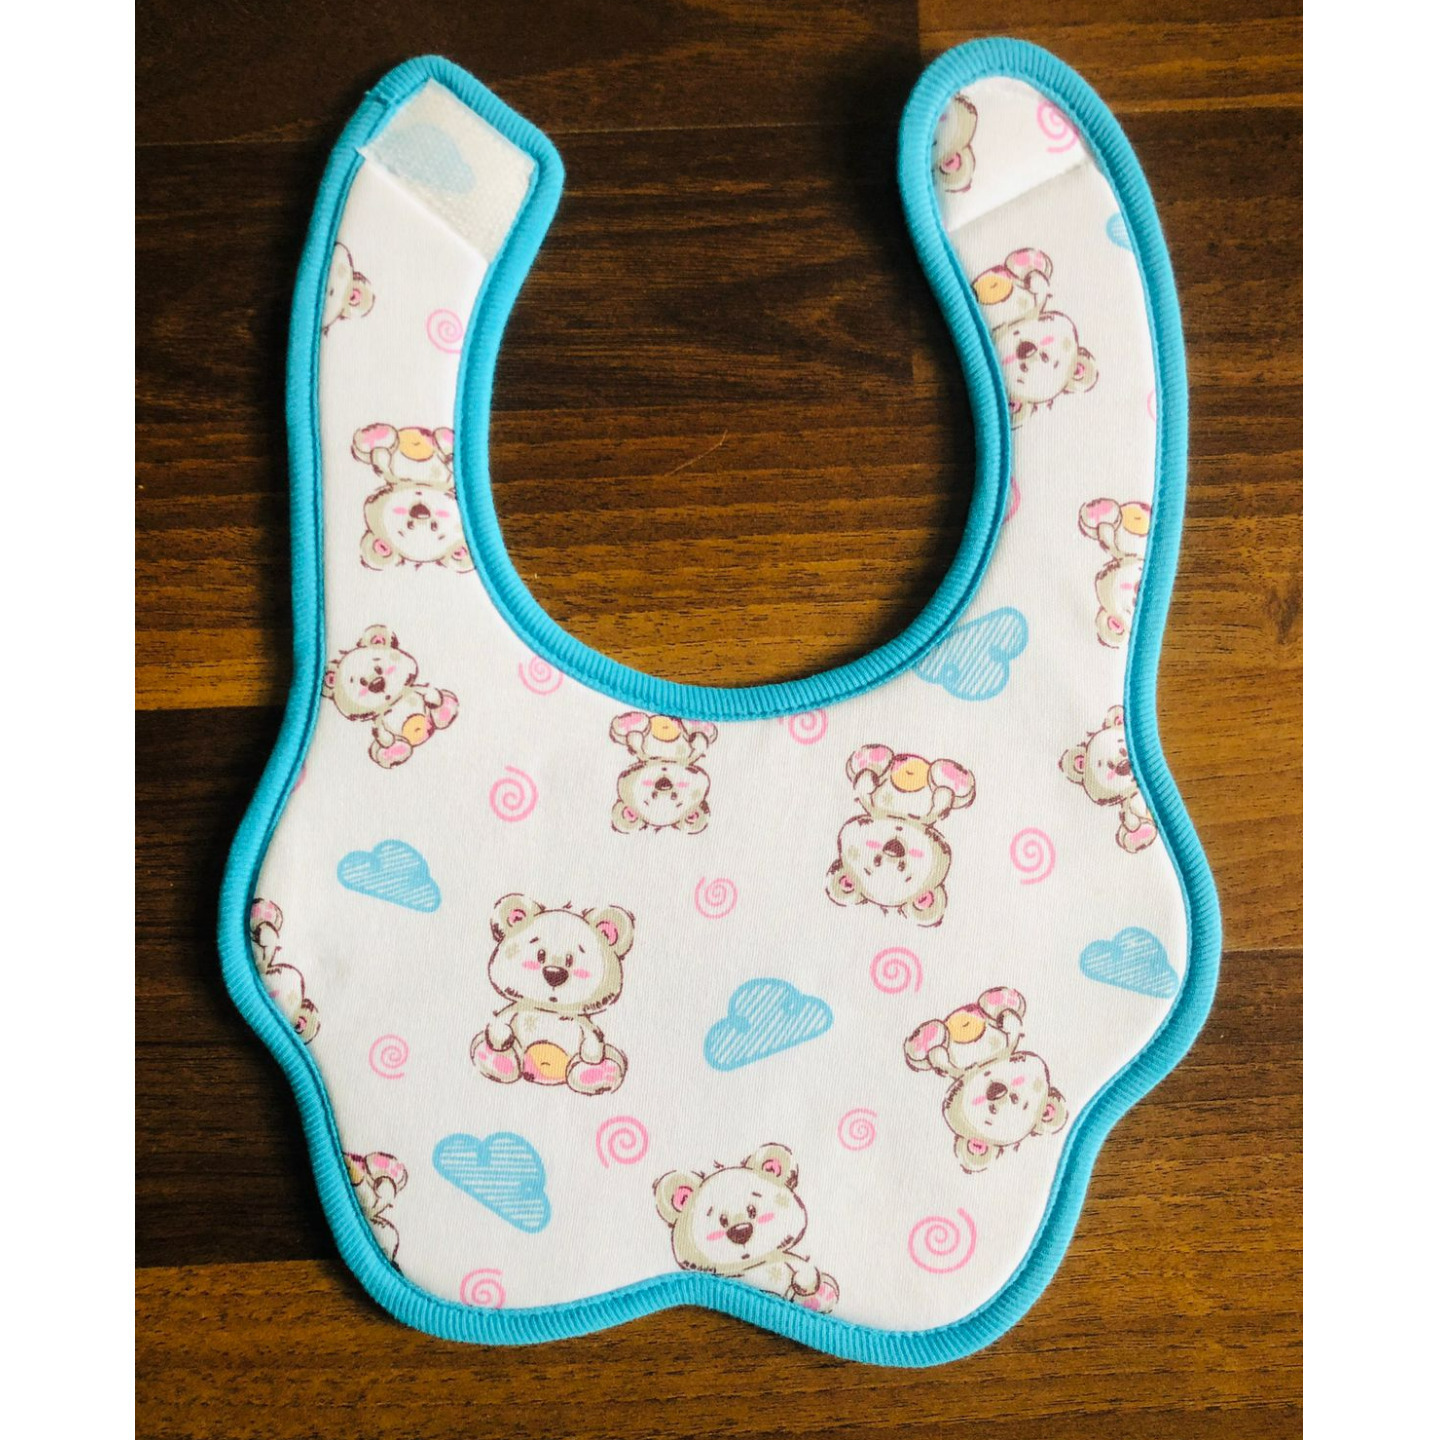 Cradle Togs Newborn Infant Baby Bib Rs 140 Only